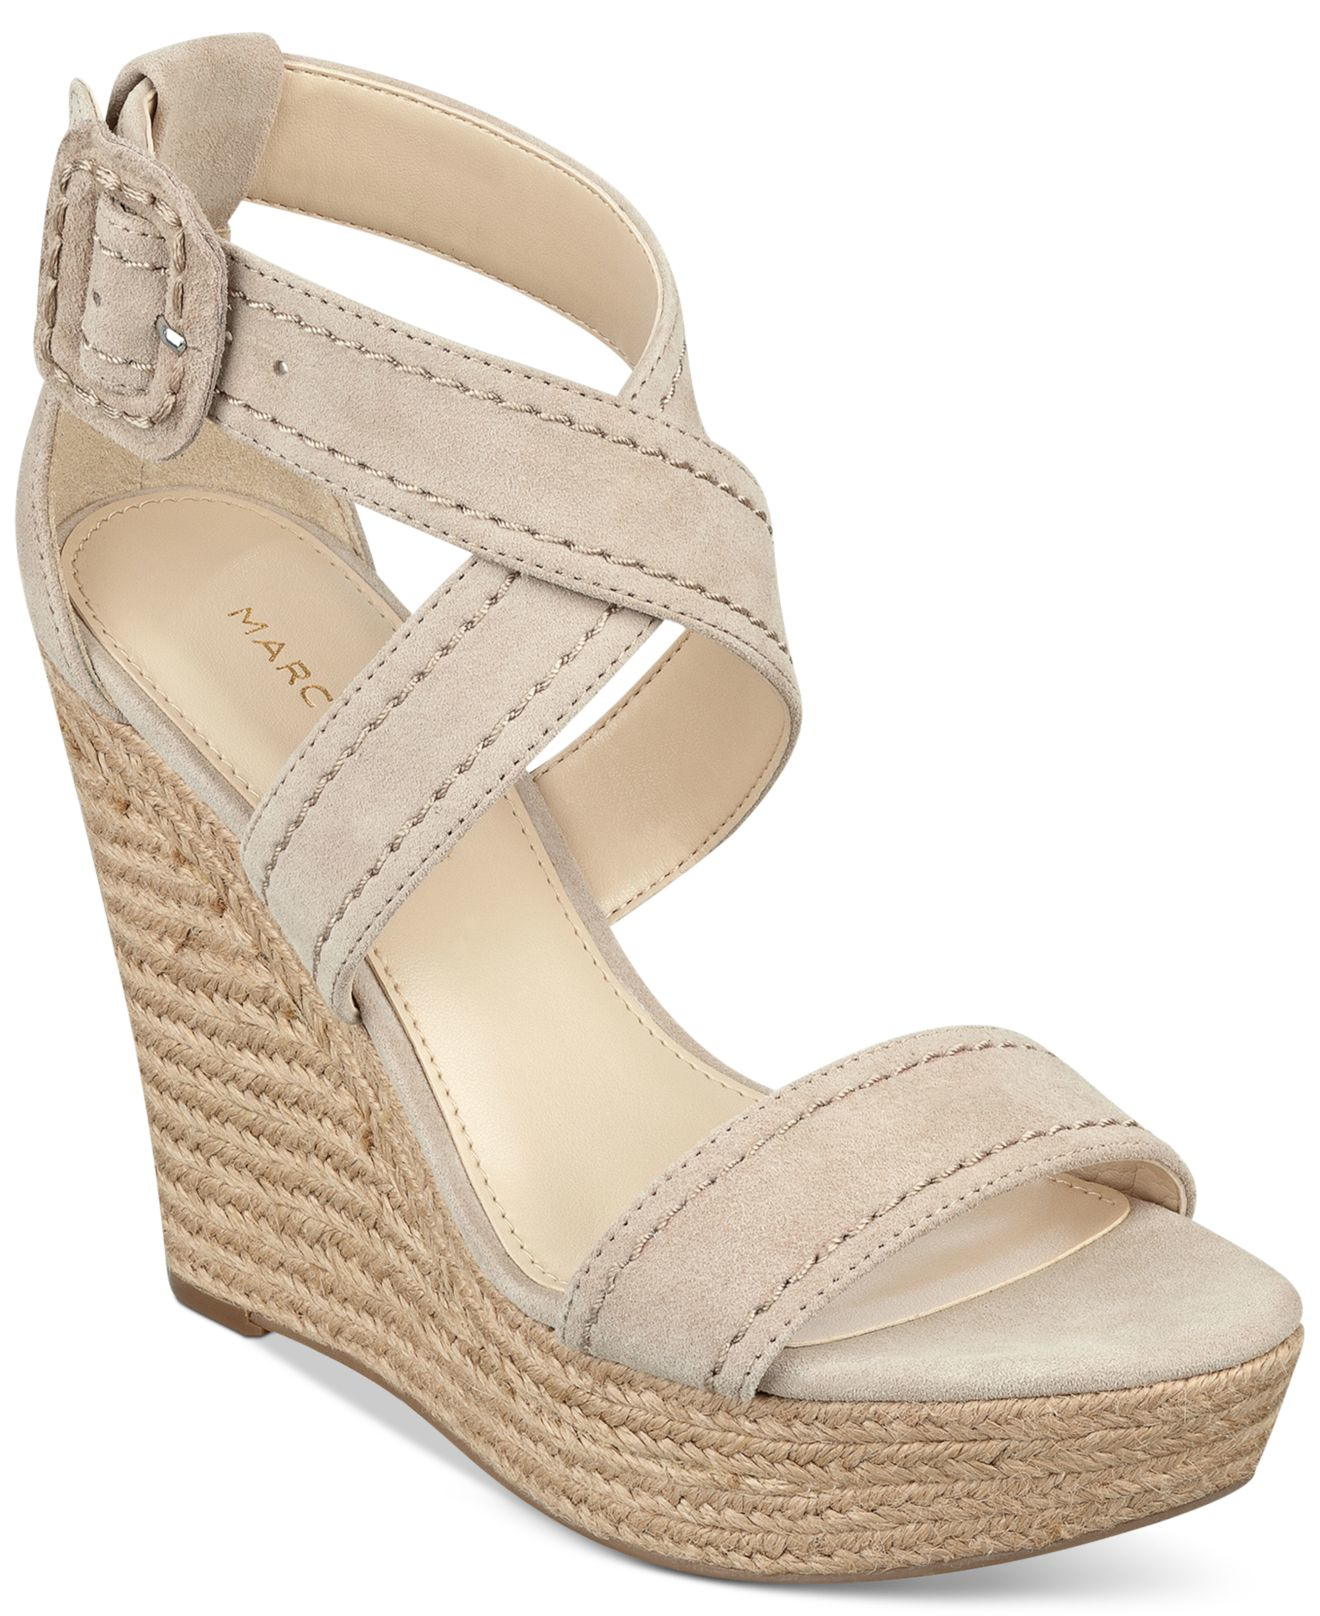 Lyst Marc Fisher Haely Platform Wedge Sandals in Natural